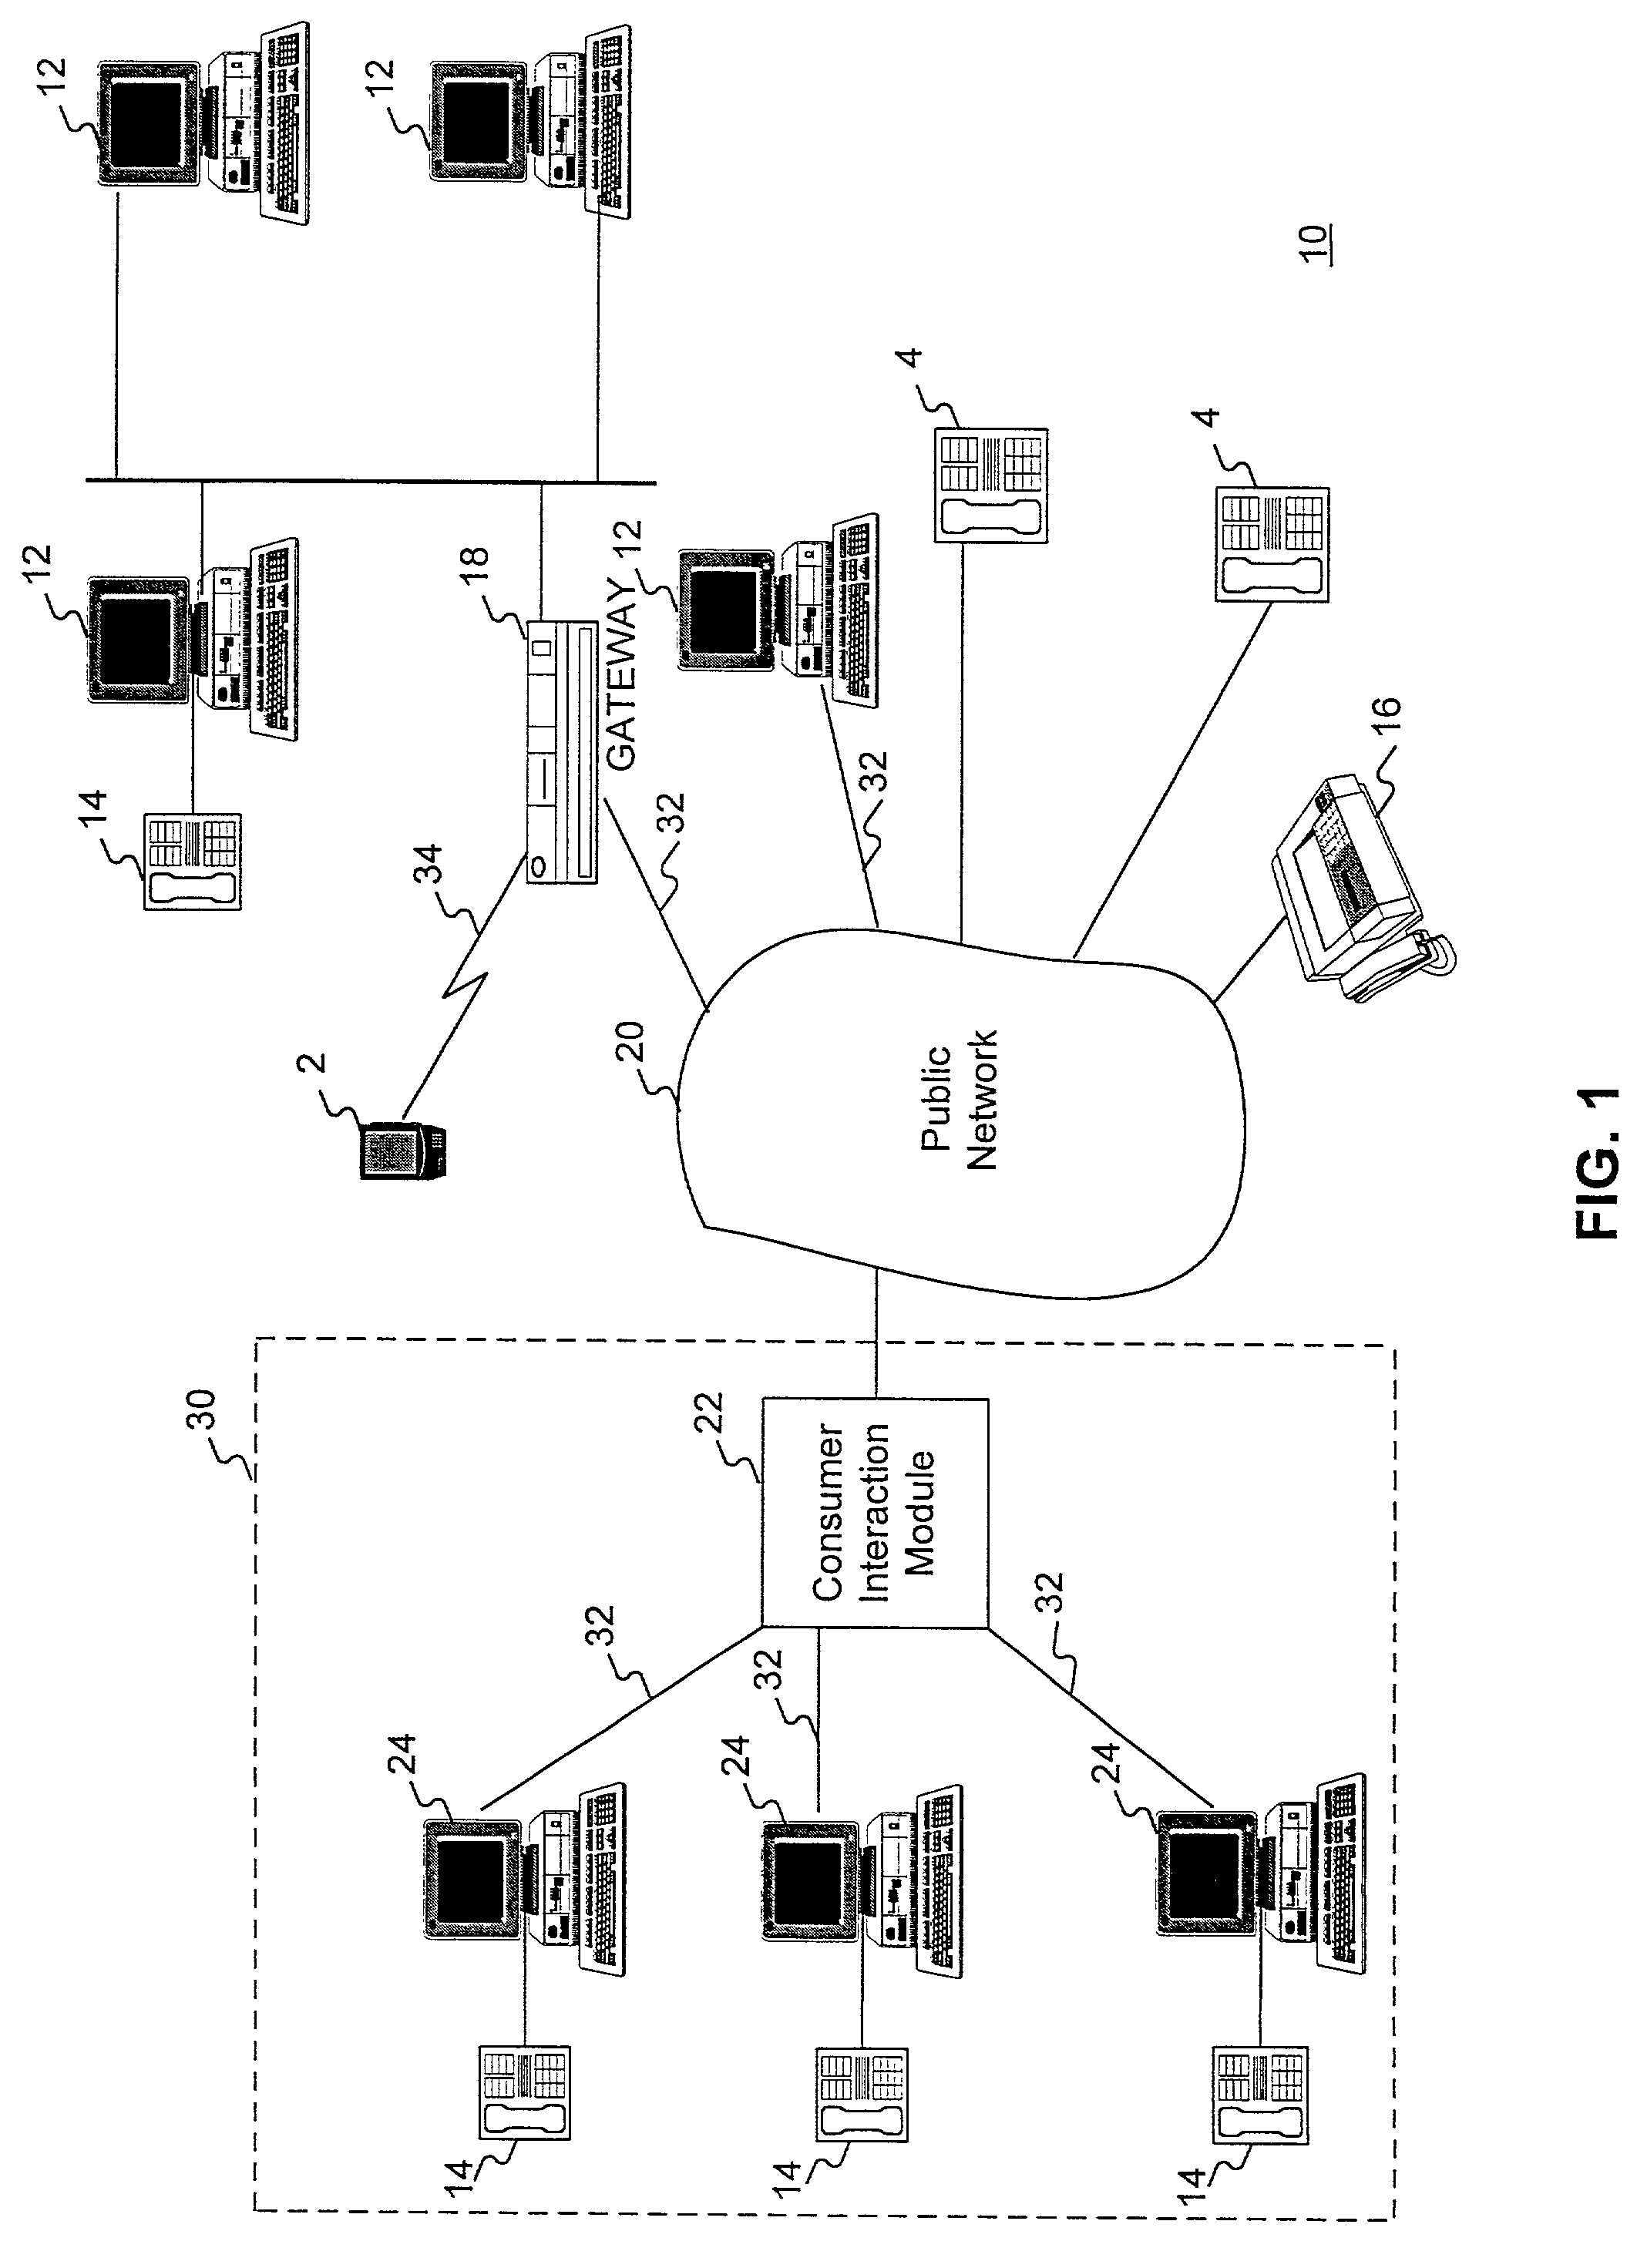 System and method for providing a multi-channel customer interaction center